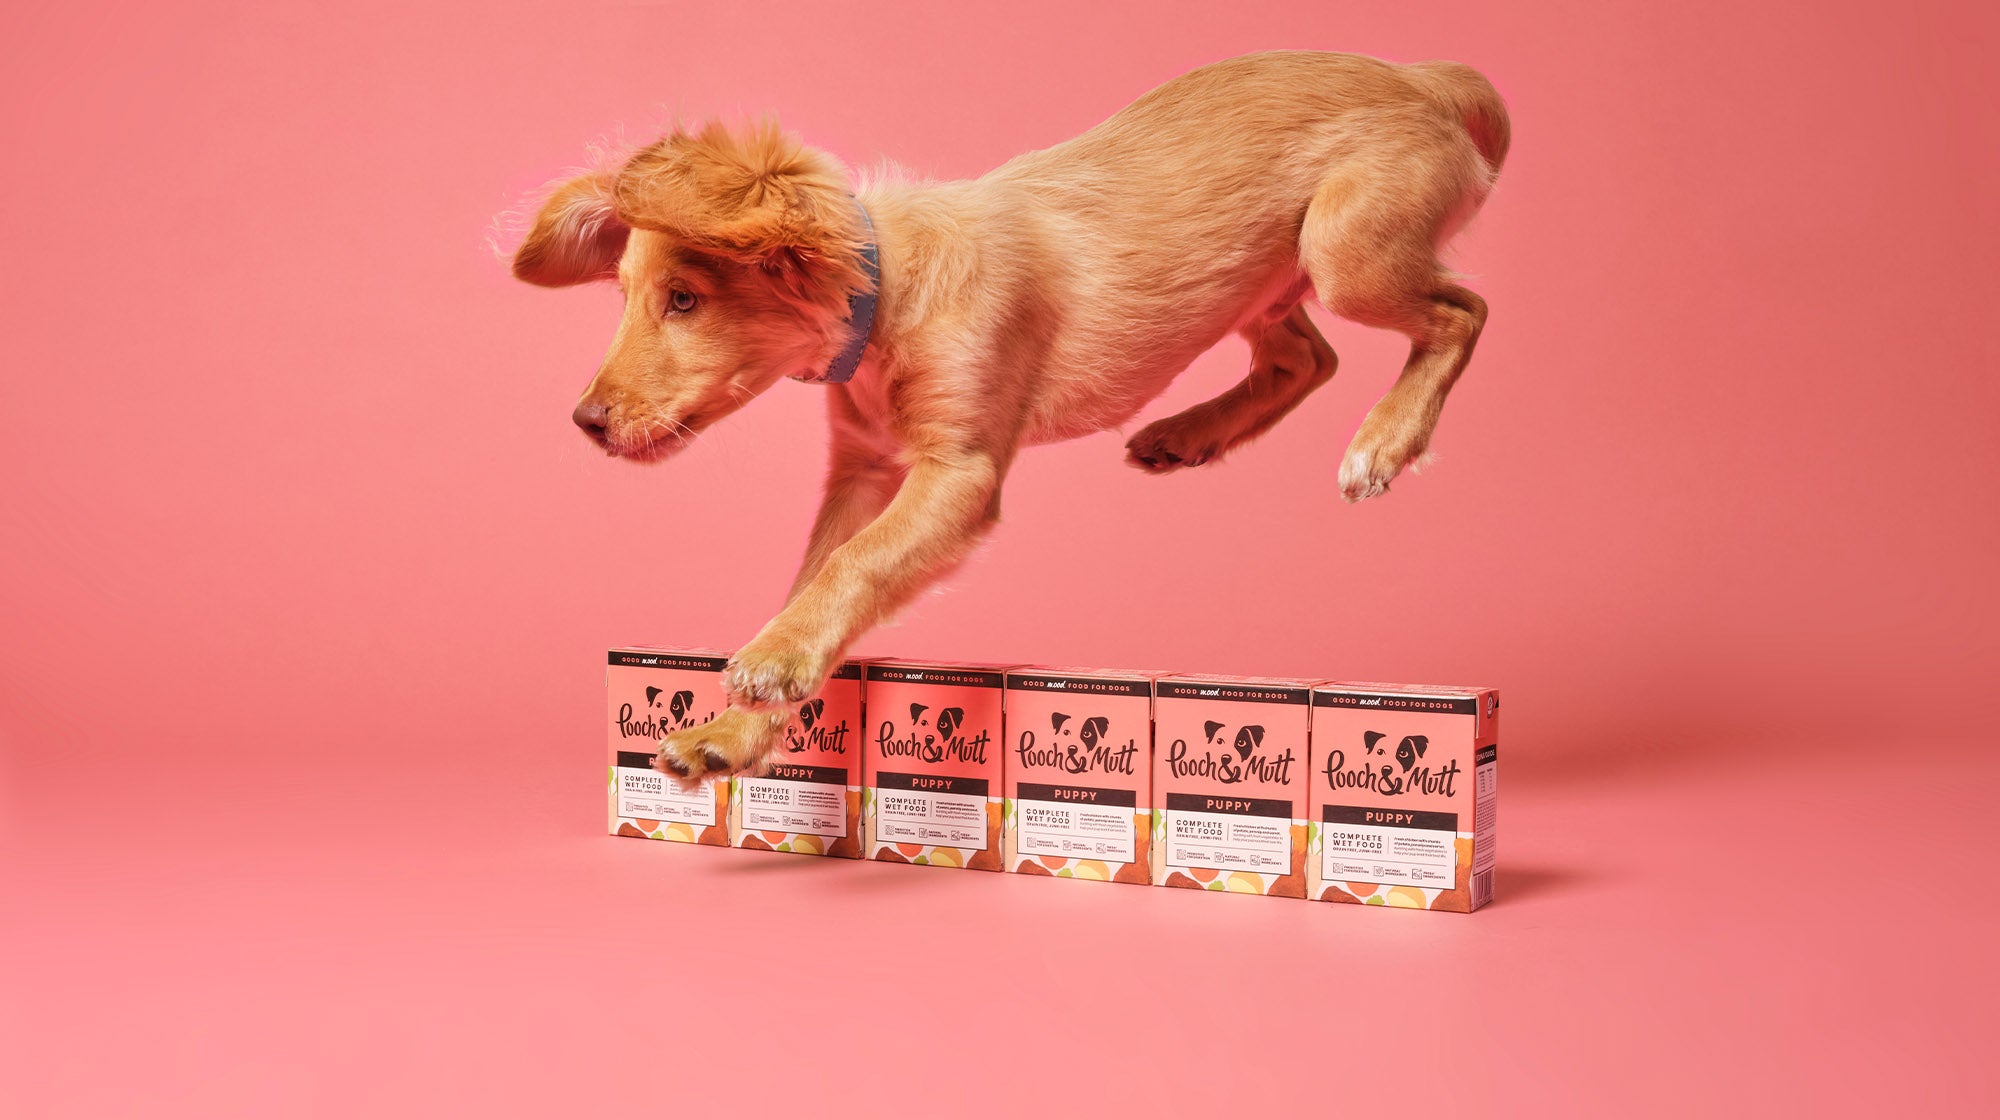 A golden coloured puppy with floppy ears, jumper over a line of Pooch & Mutt food in pink packaging, against a pink background